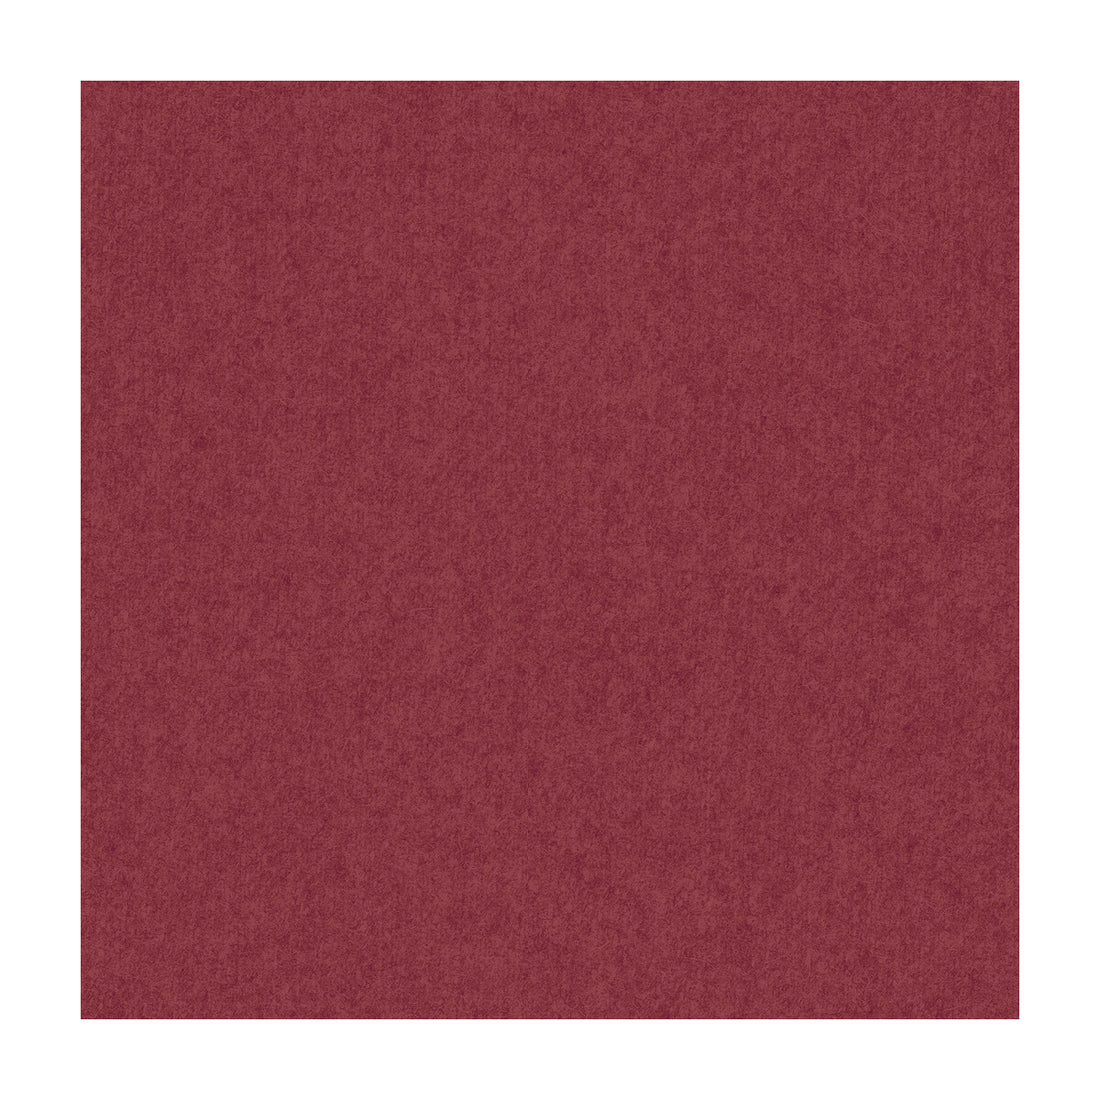 Skye Wool fabric in cranberry color - pattern 2017118.9.0 - by Lee Jofa